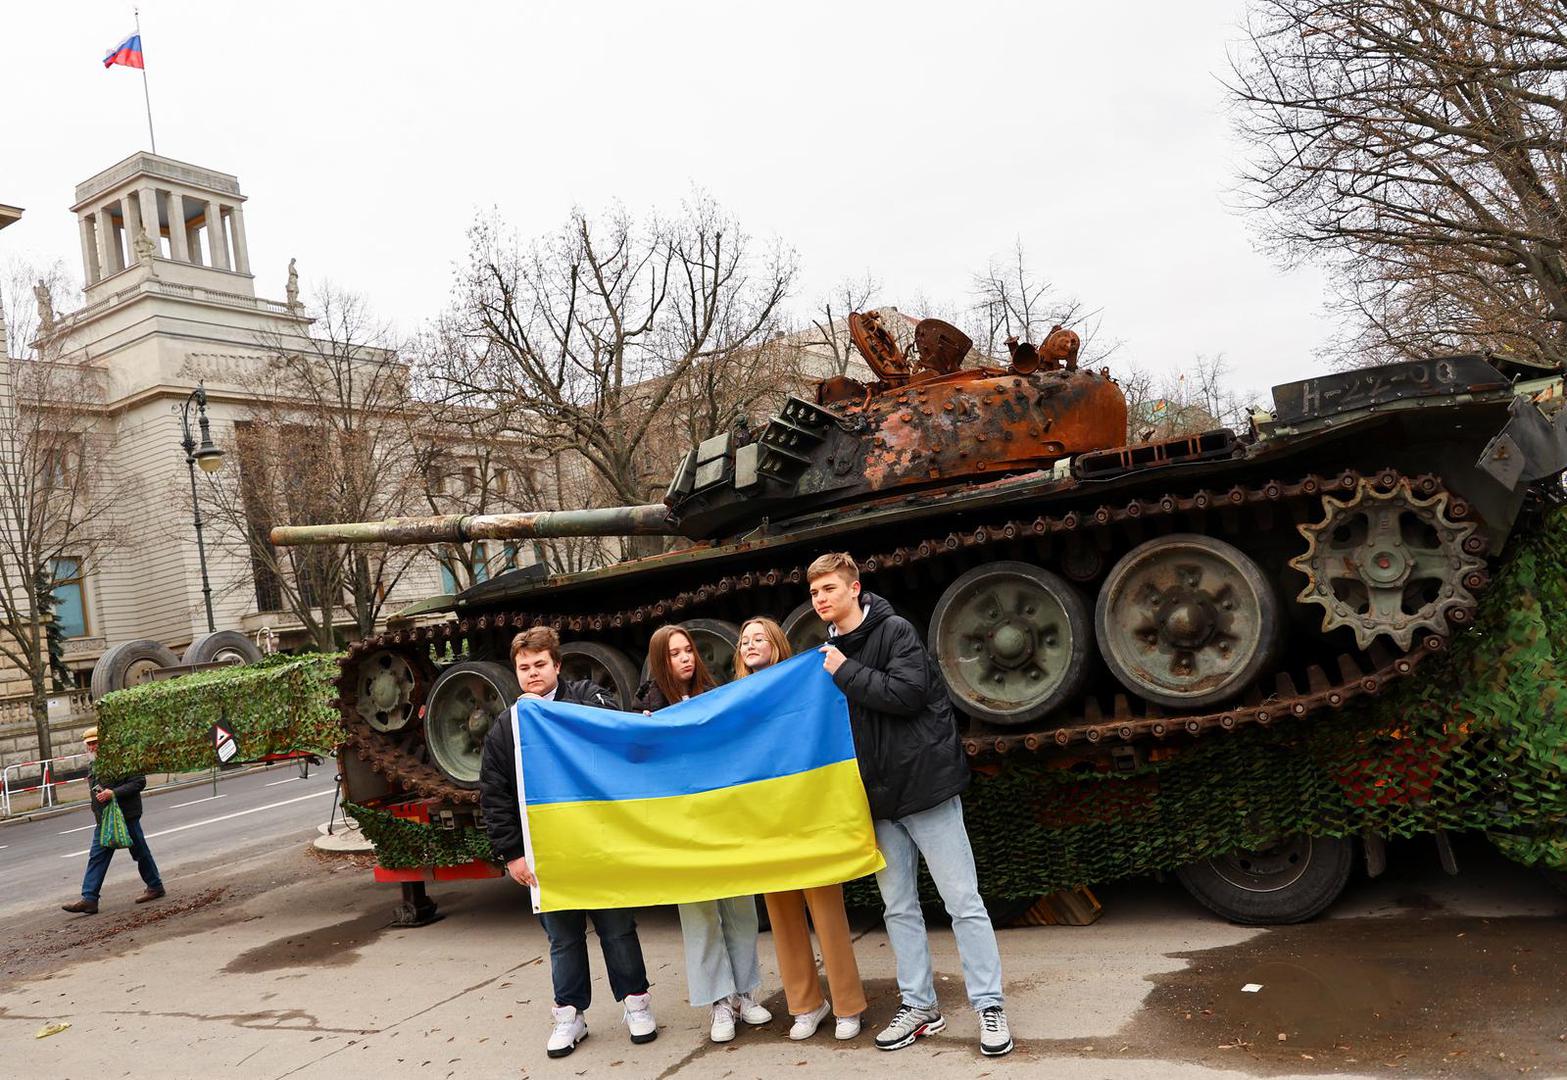 Ukrainian refugees Vladyslav Morozov from Dnipro, Dariia Harbar and Maryana Yartseva from Kyiv and Daniel Chumachenko from Kharkiv hold the Ukrainian national flag in front of the remains of a destroyed Russian T-72 tank, secured from the Ukrainian village of Dmytrivka, outside Kyiv, kept on display near the Russian embassy at Unter den Linden boulevard, during an event to mark the one-year anniversary of the Russian invasion of Ukraine, in Berlin, Germany, February 24, 2023. REUTERS/Fabrizio Bensch Photo: Fabrizio Bensch/REUTERS